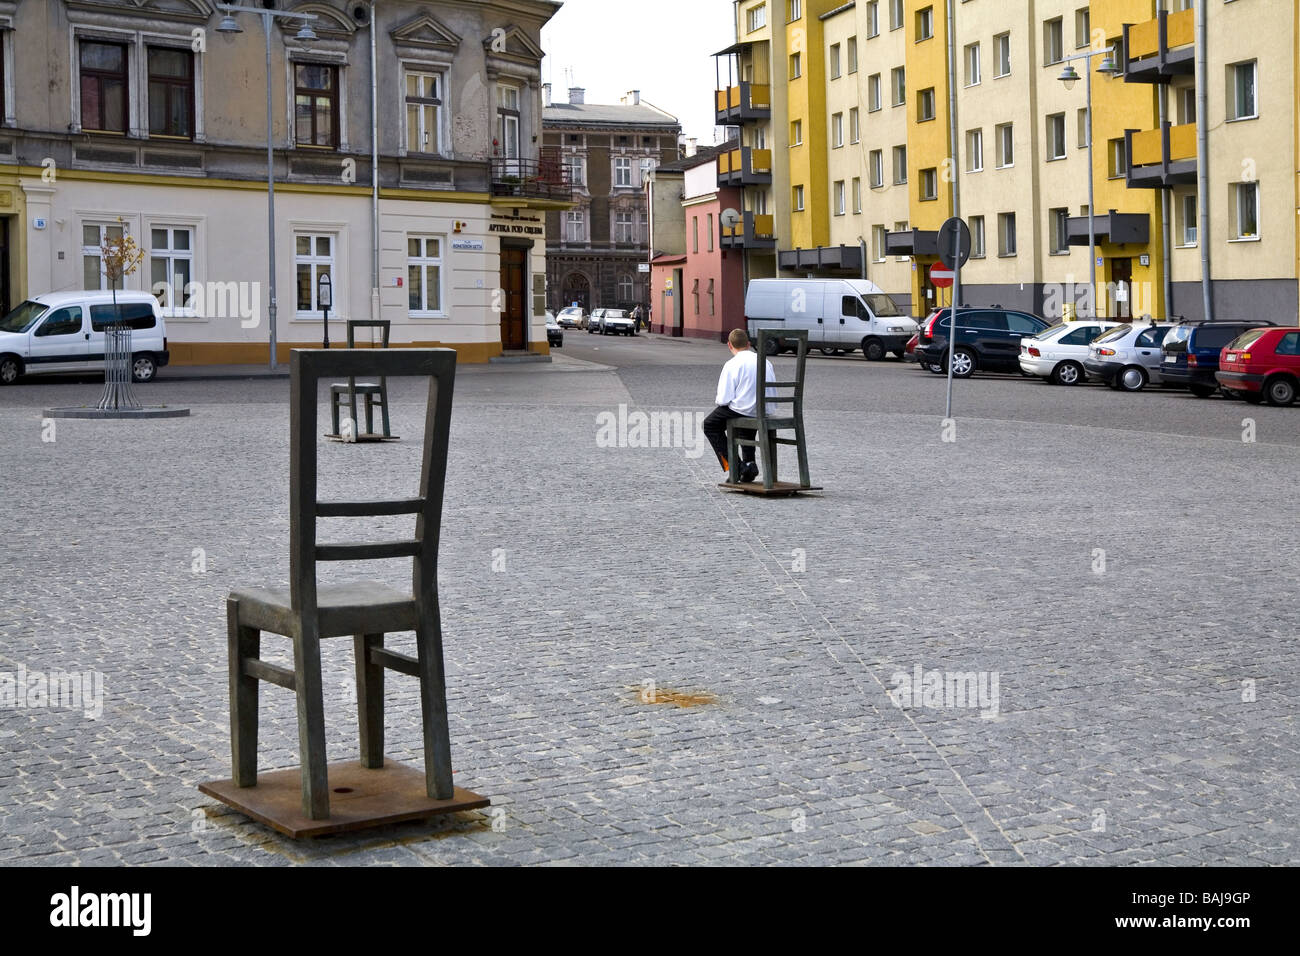 Ghetto s Heroes Place called Agreement Place this is where the Nazis ogranized the Jews ghetto Cracow Poland Stock Photo